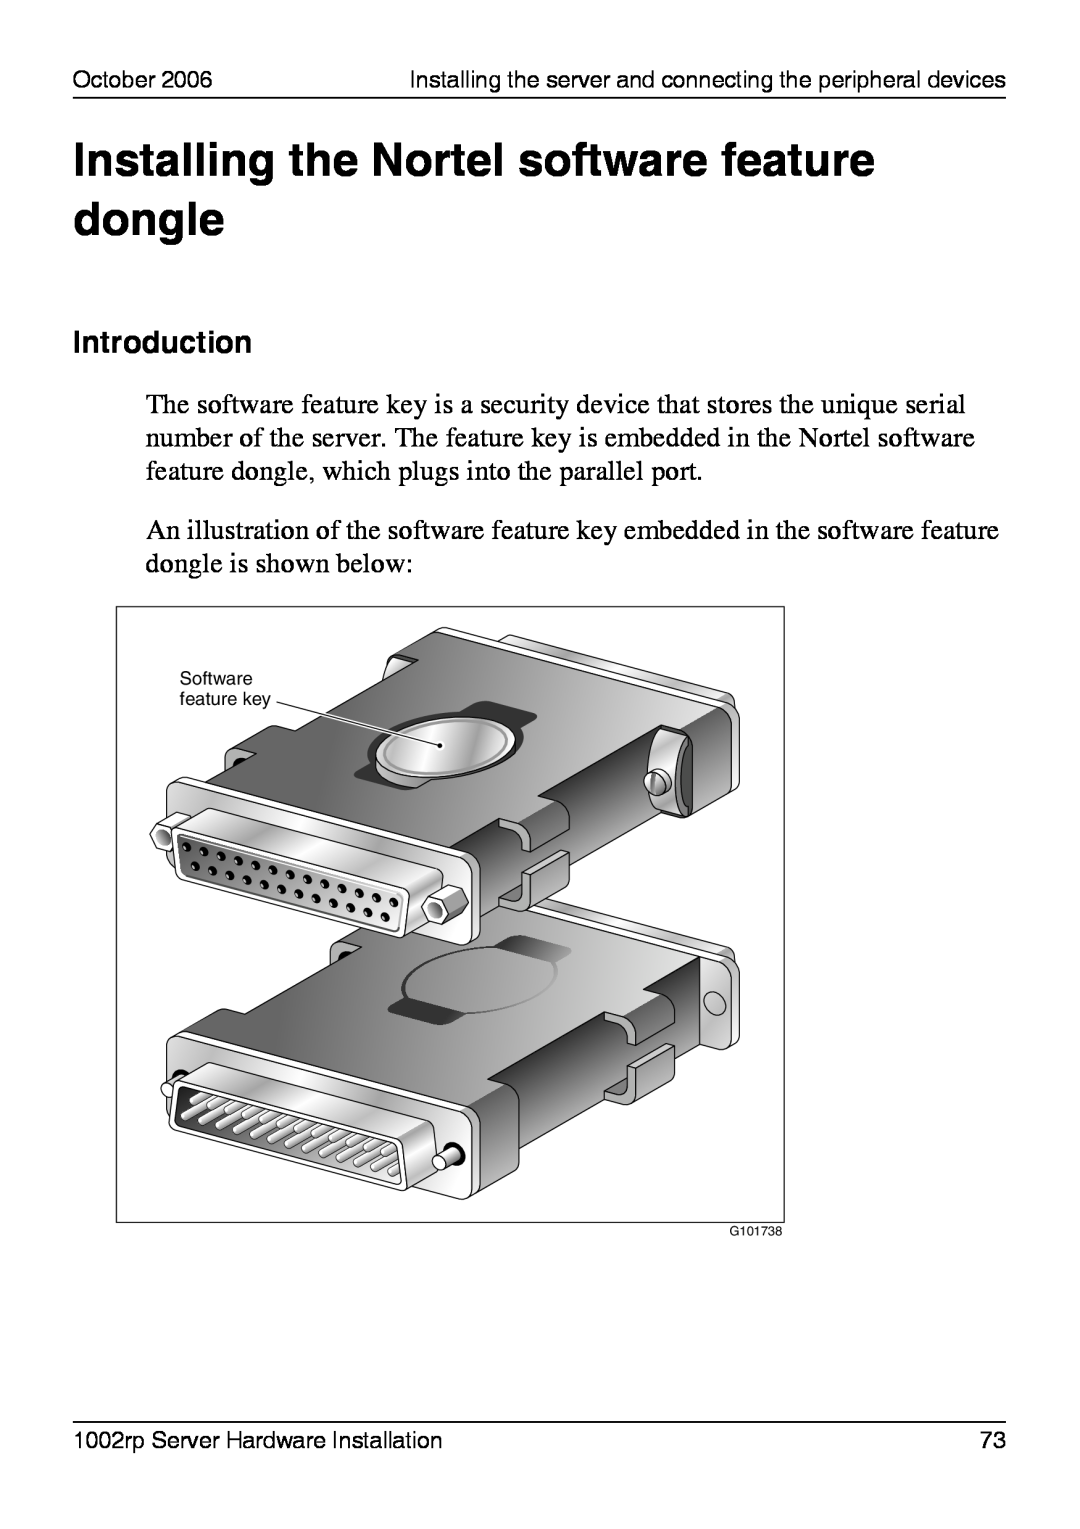 Nortel Networks 1002rp manual Installing the Nortel software feature dongle, Introduction, Software, feature key 